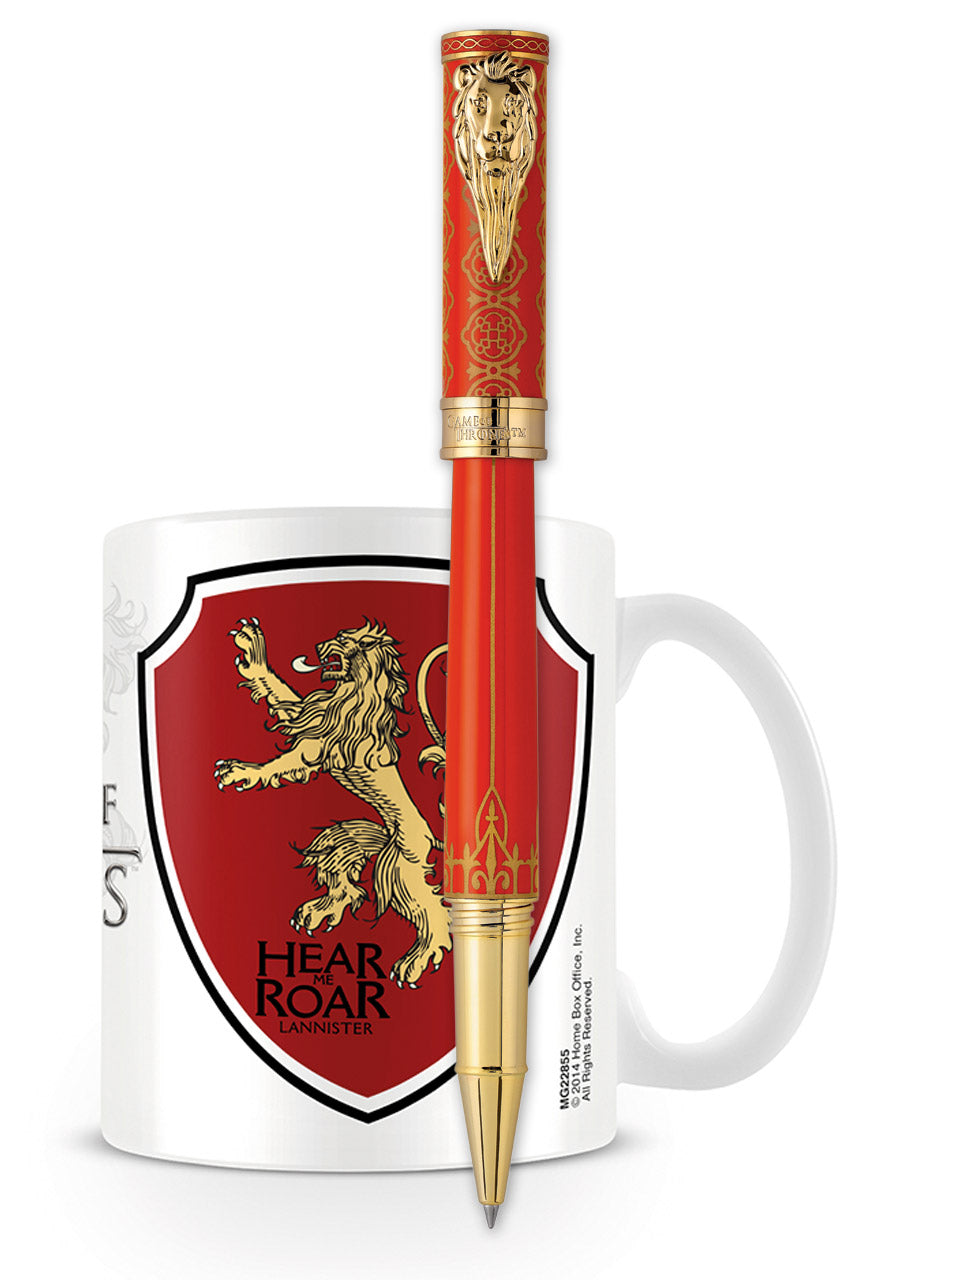 Montegrappa Game of Thrones Rollerball Pen - Lannister